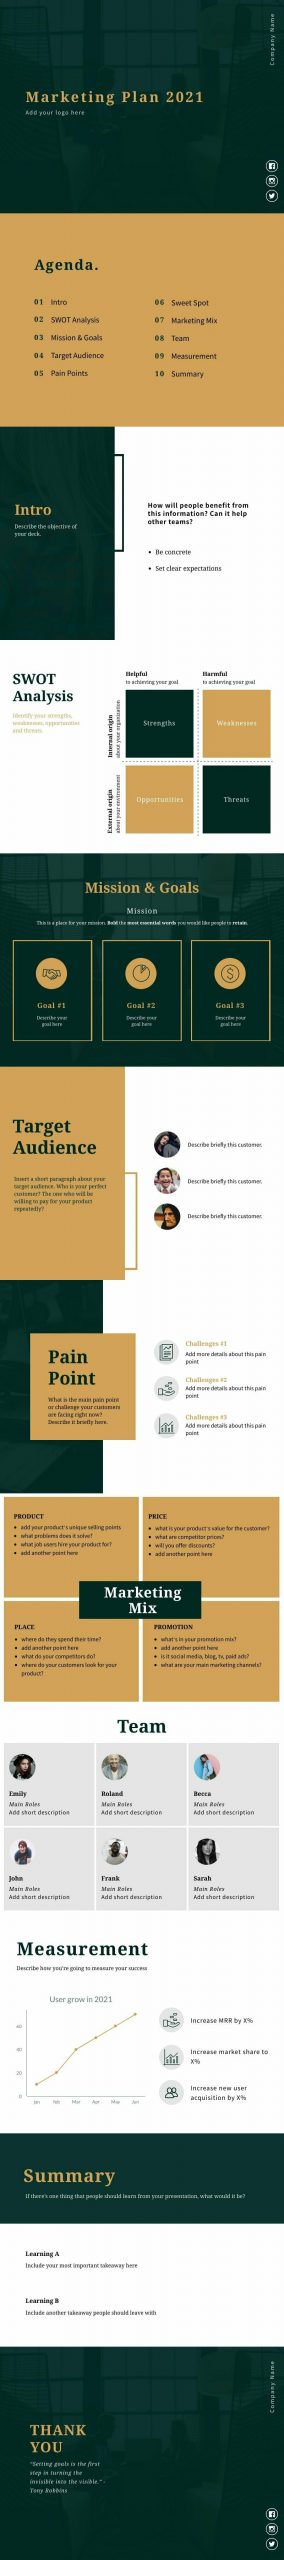 Marketing Plan for 2018 Presentations Template